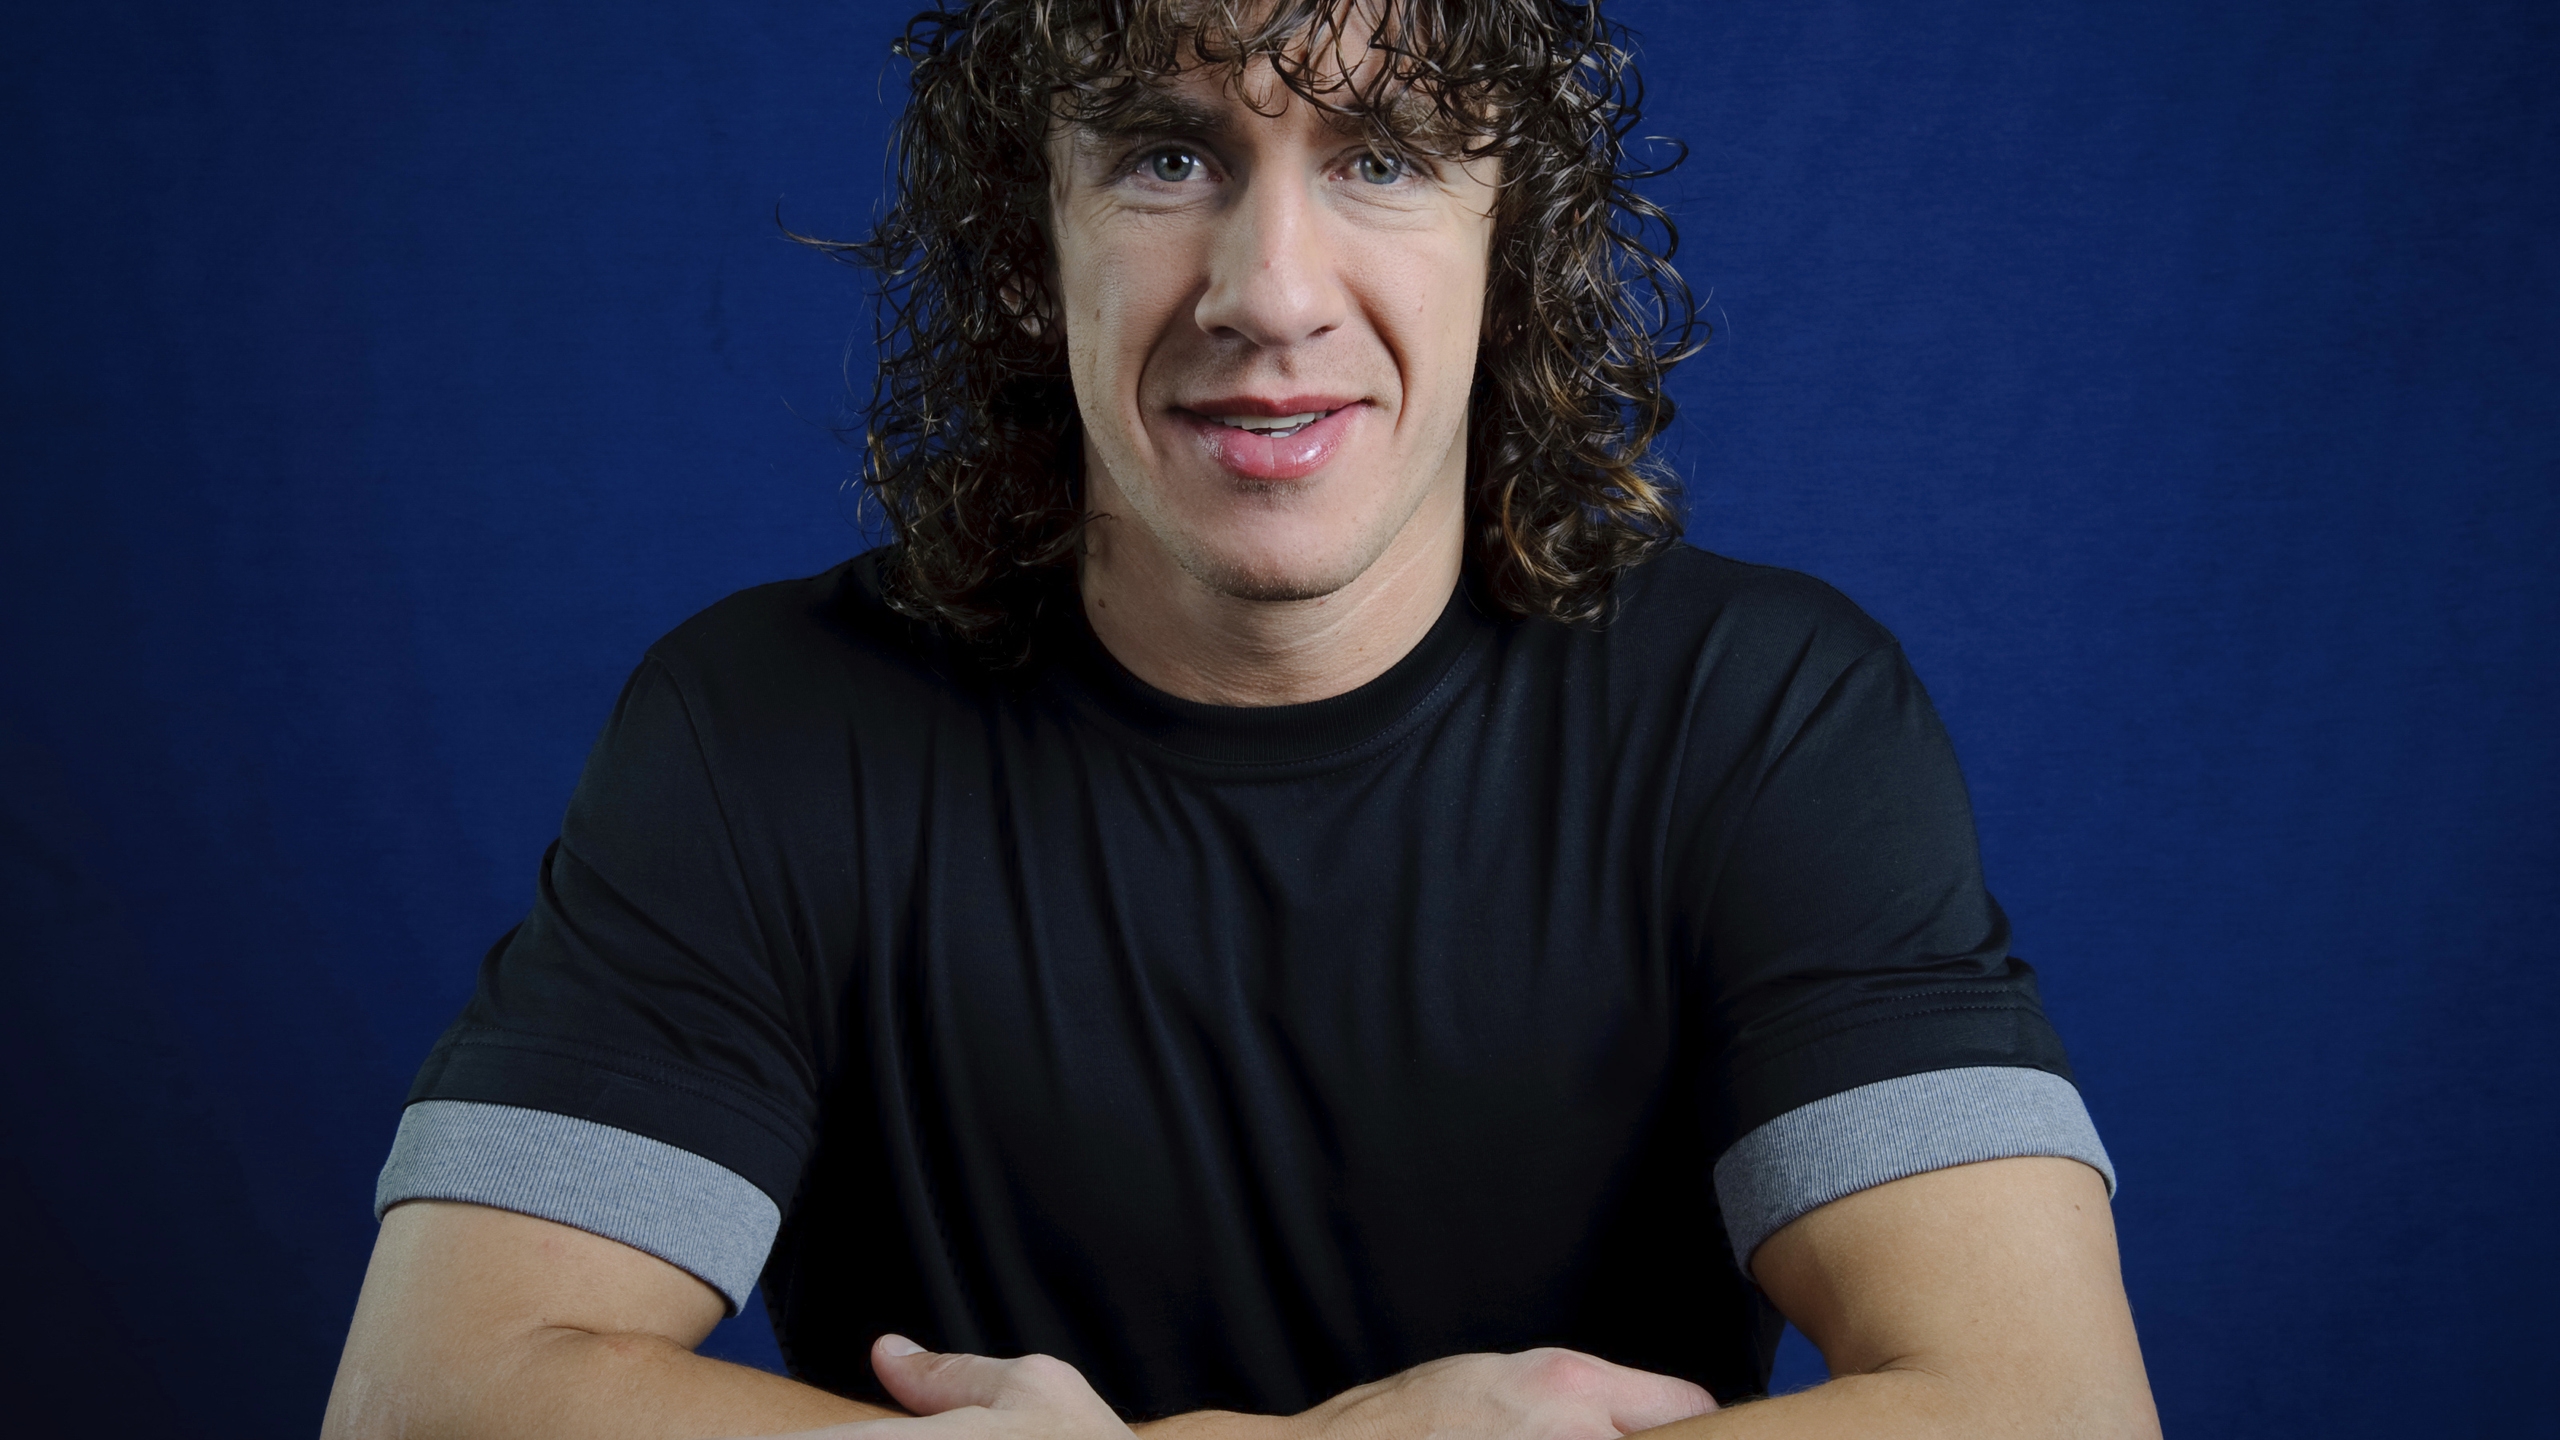 Carles Puyol Smile for 2560x1440 HDTV resolution